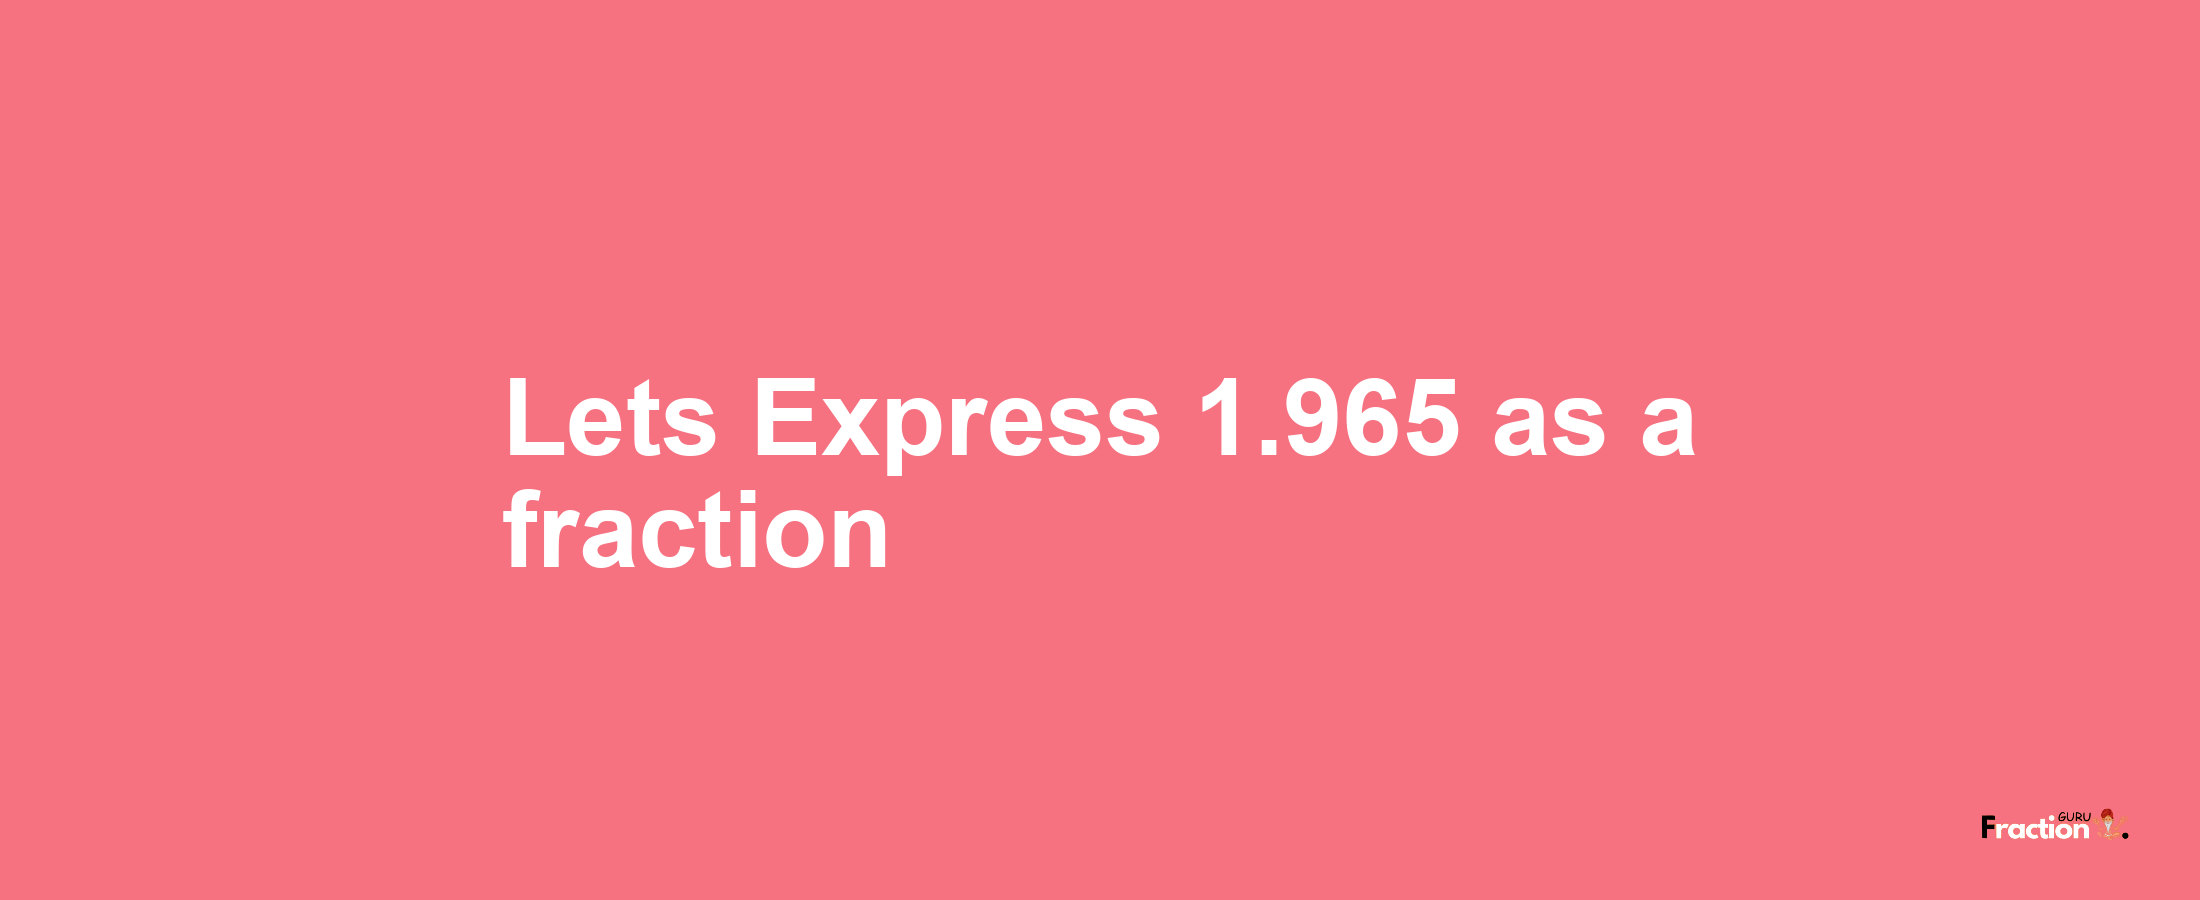 Lets Express 1.965 as afraction